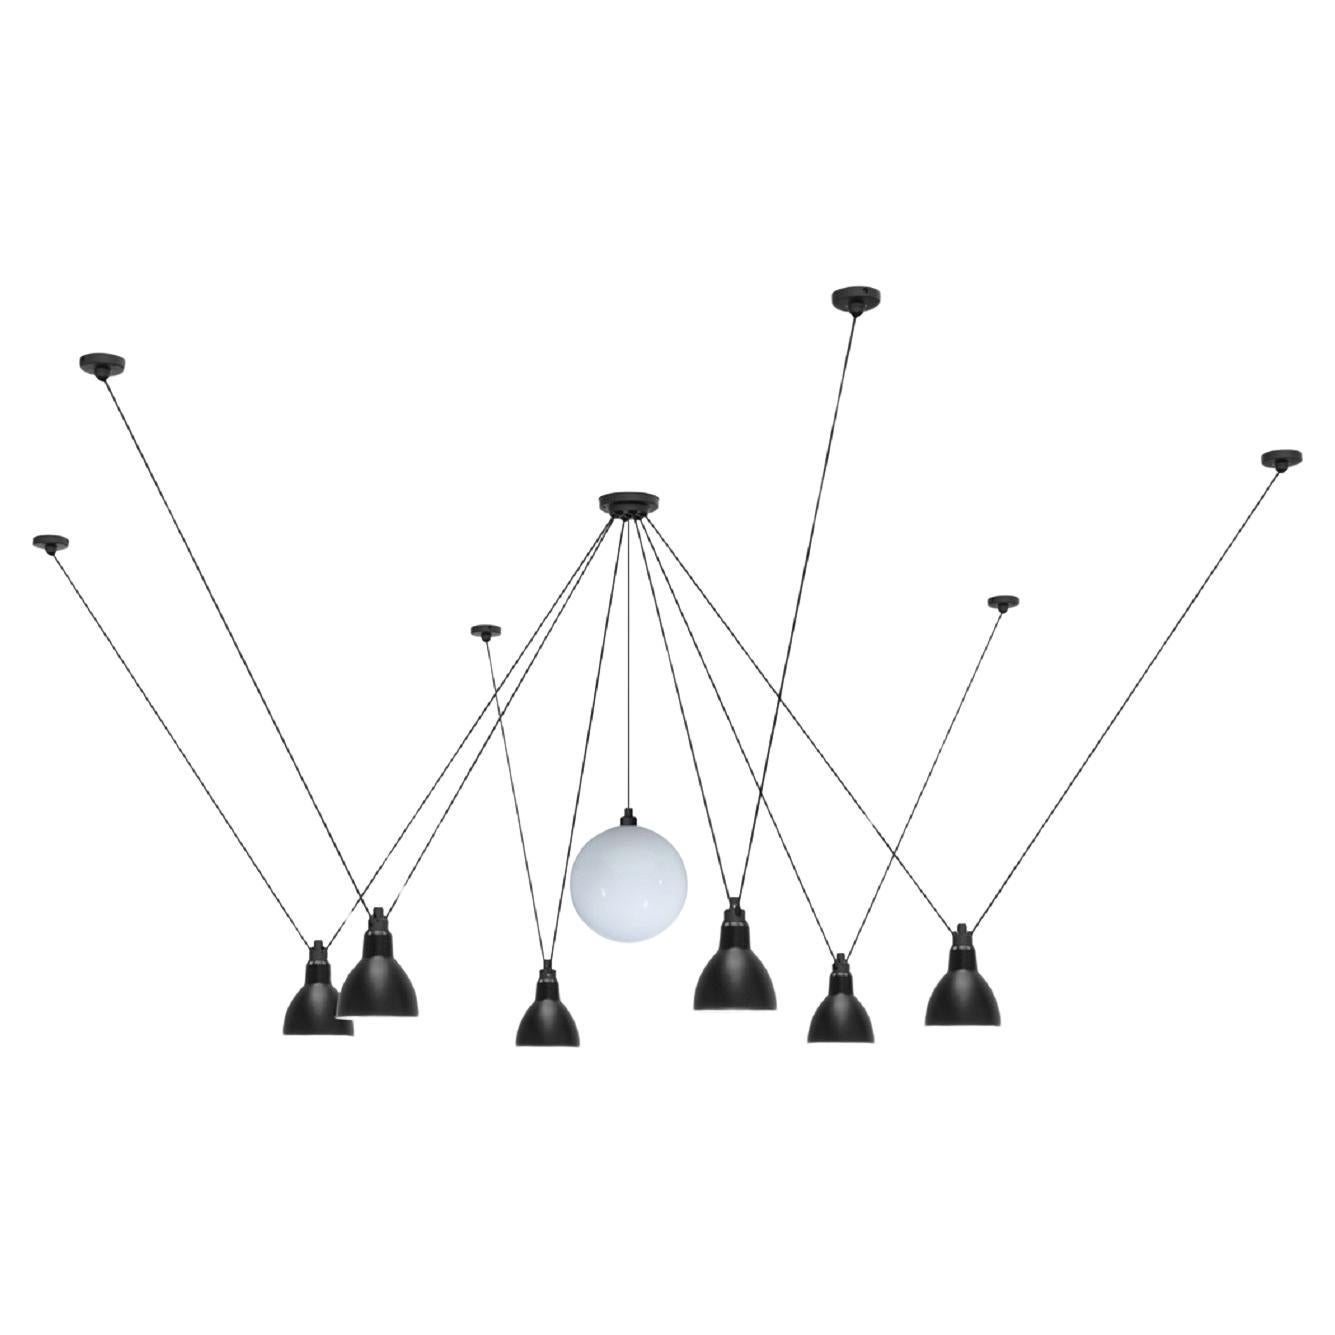 DCW Editions Les Acrobates N°327 L Round Pendant Lamp in Black & Glassball 250 For Sale